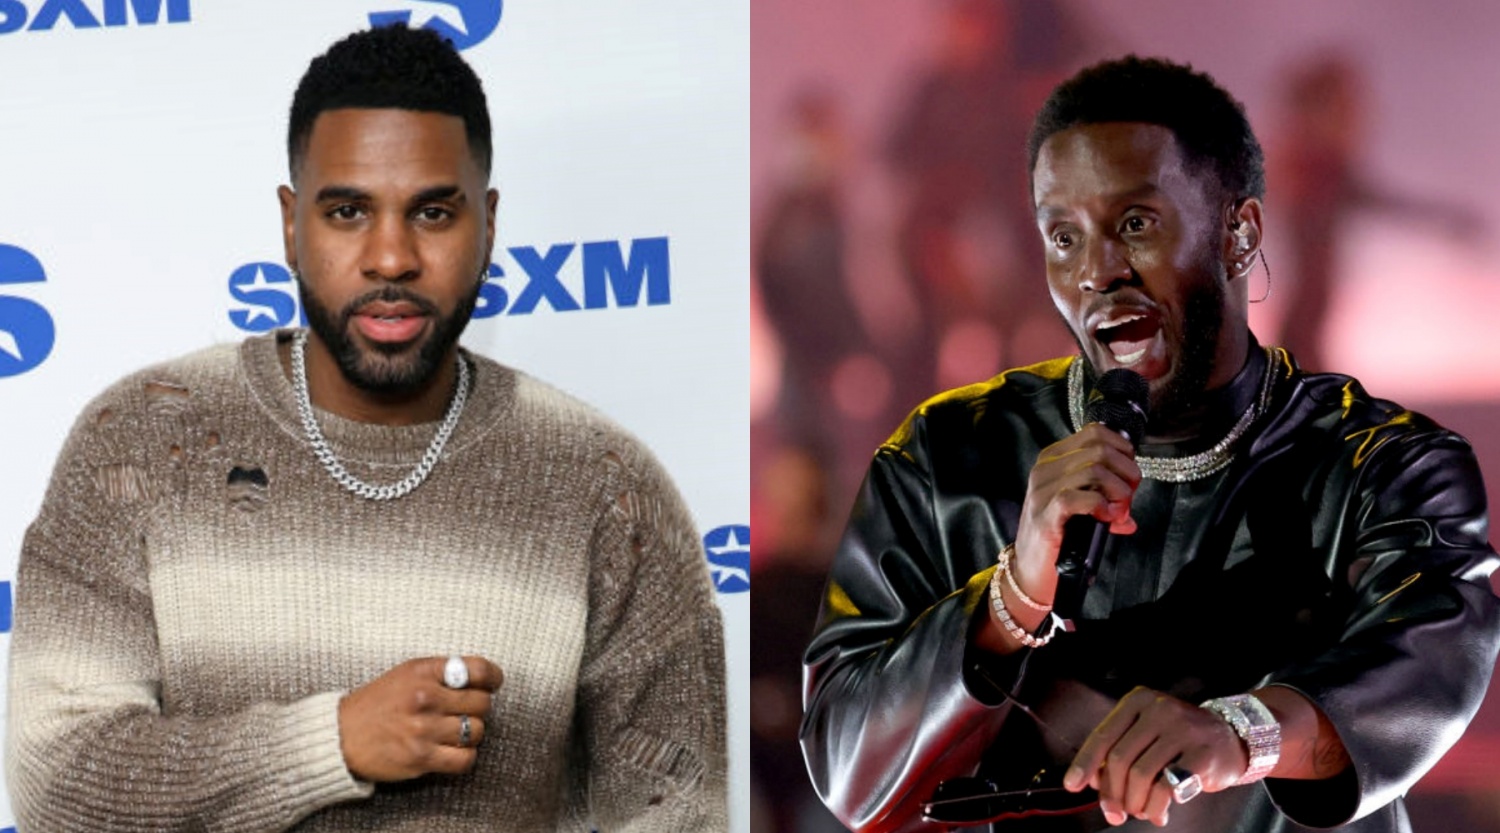 Jason Derulo Conmments on Diddy's Issues